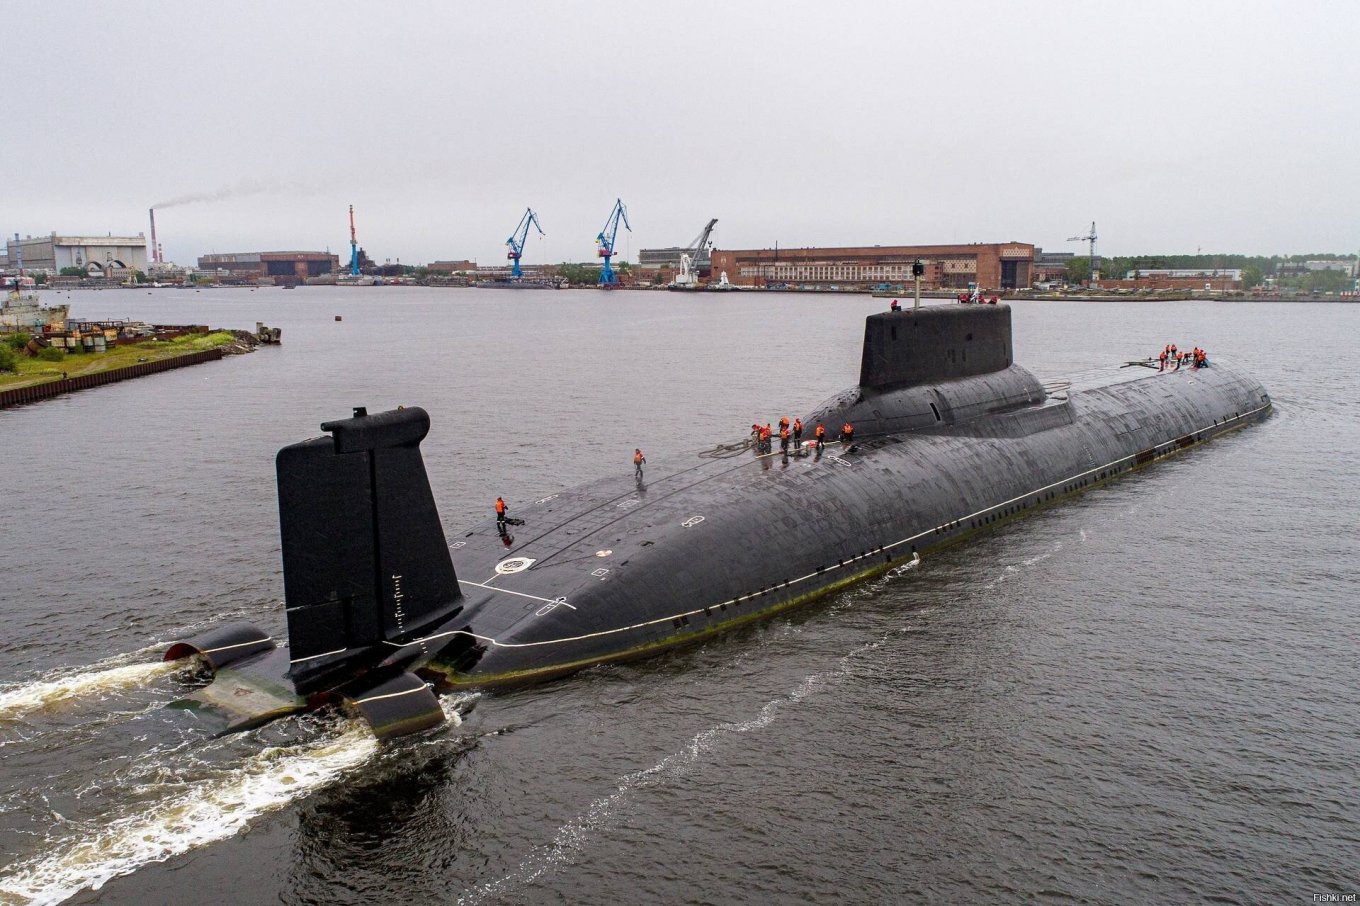 Russia Intended to Equip the TK-208 Submarine With 200 Kalibr Missiles, But the Boat Will Be Scrapped, Defense Express, war in Ukraine, Russian-Ukrainian war